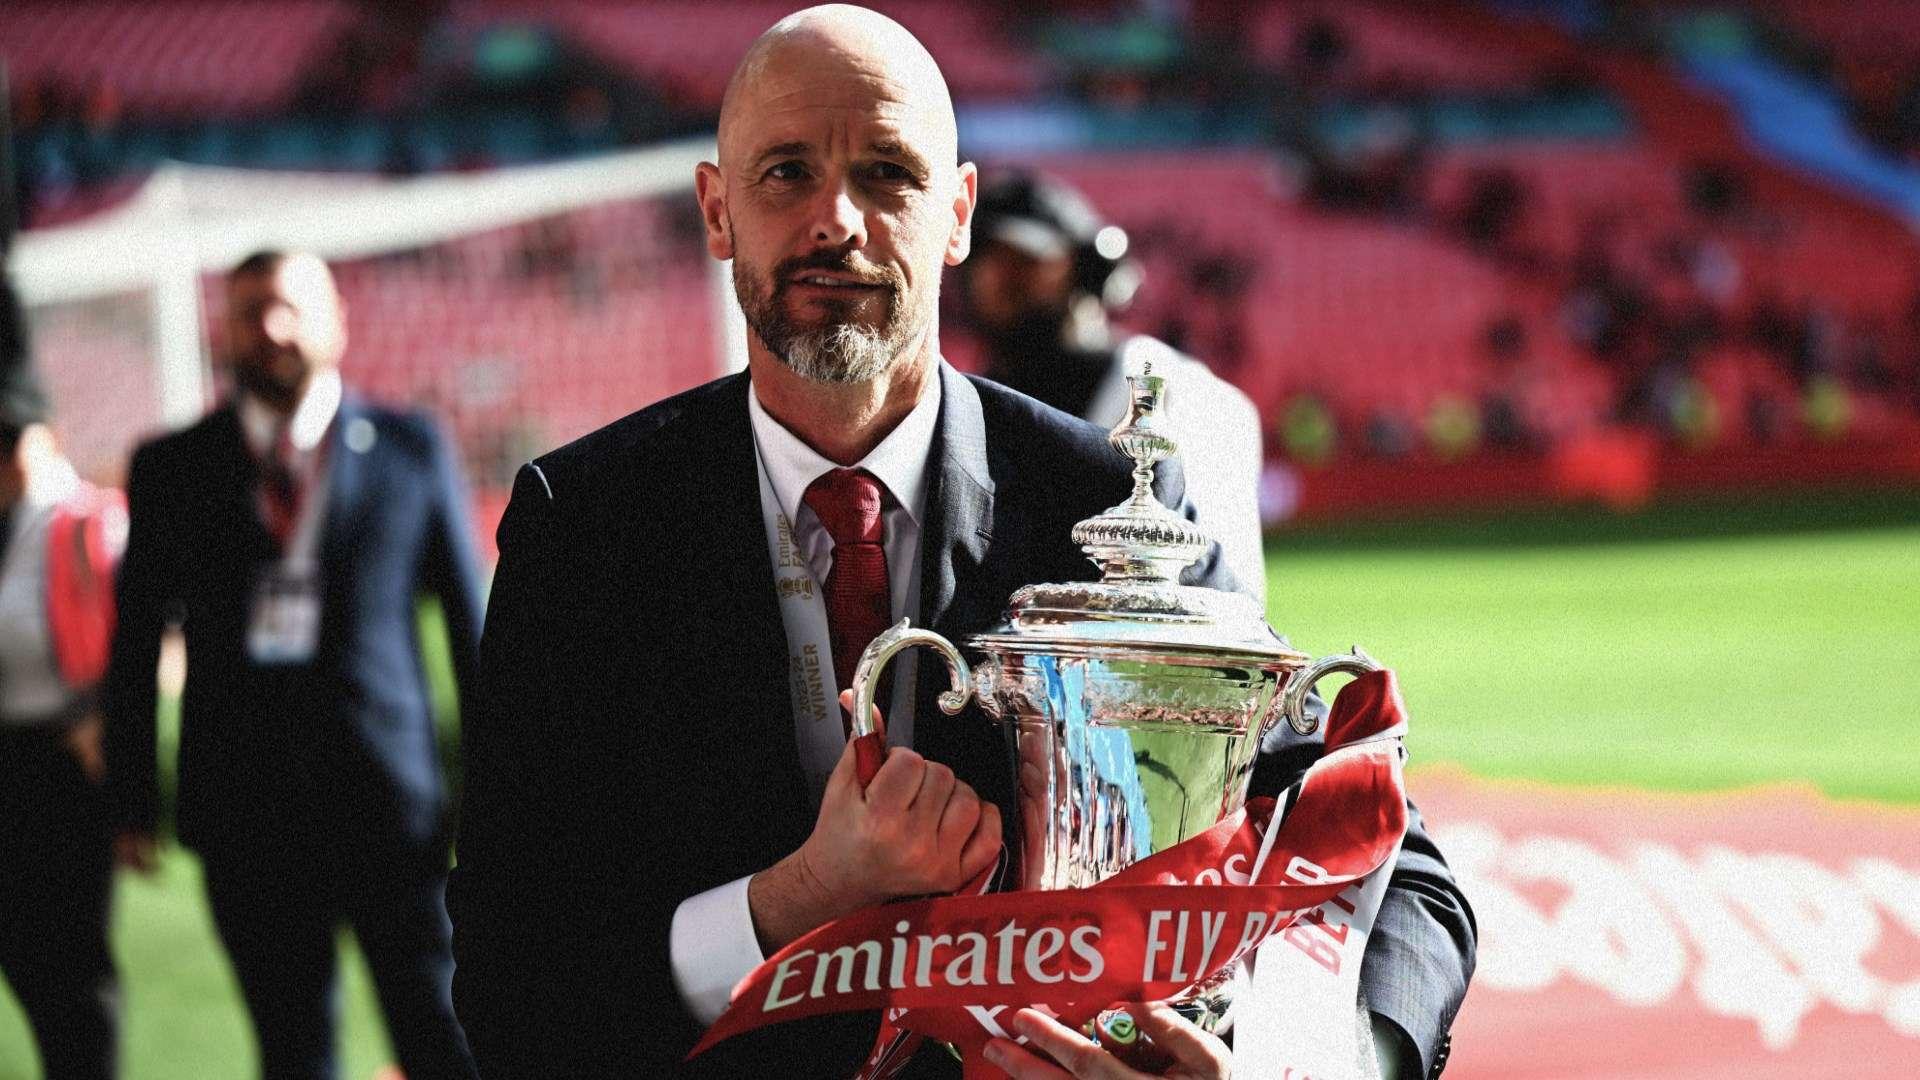 Ten Hag still has to go! FA Cup can't mask disastrous season